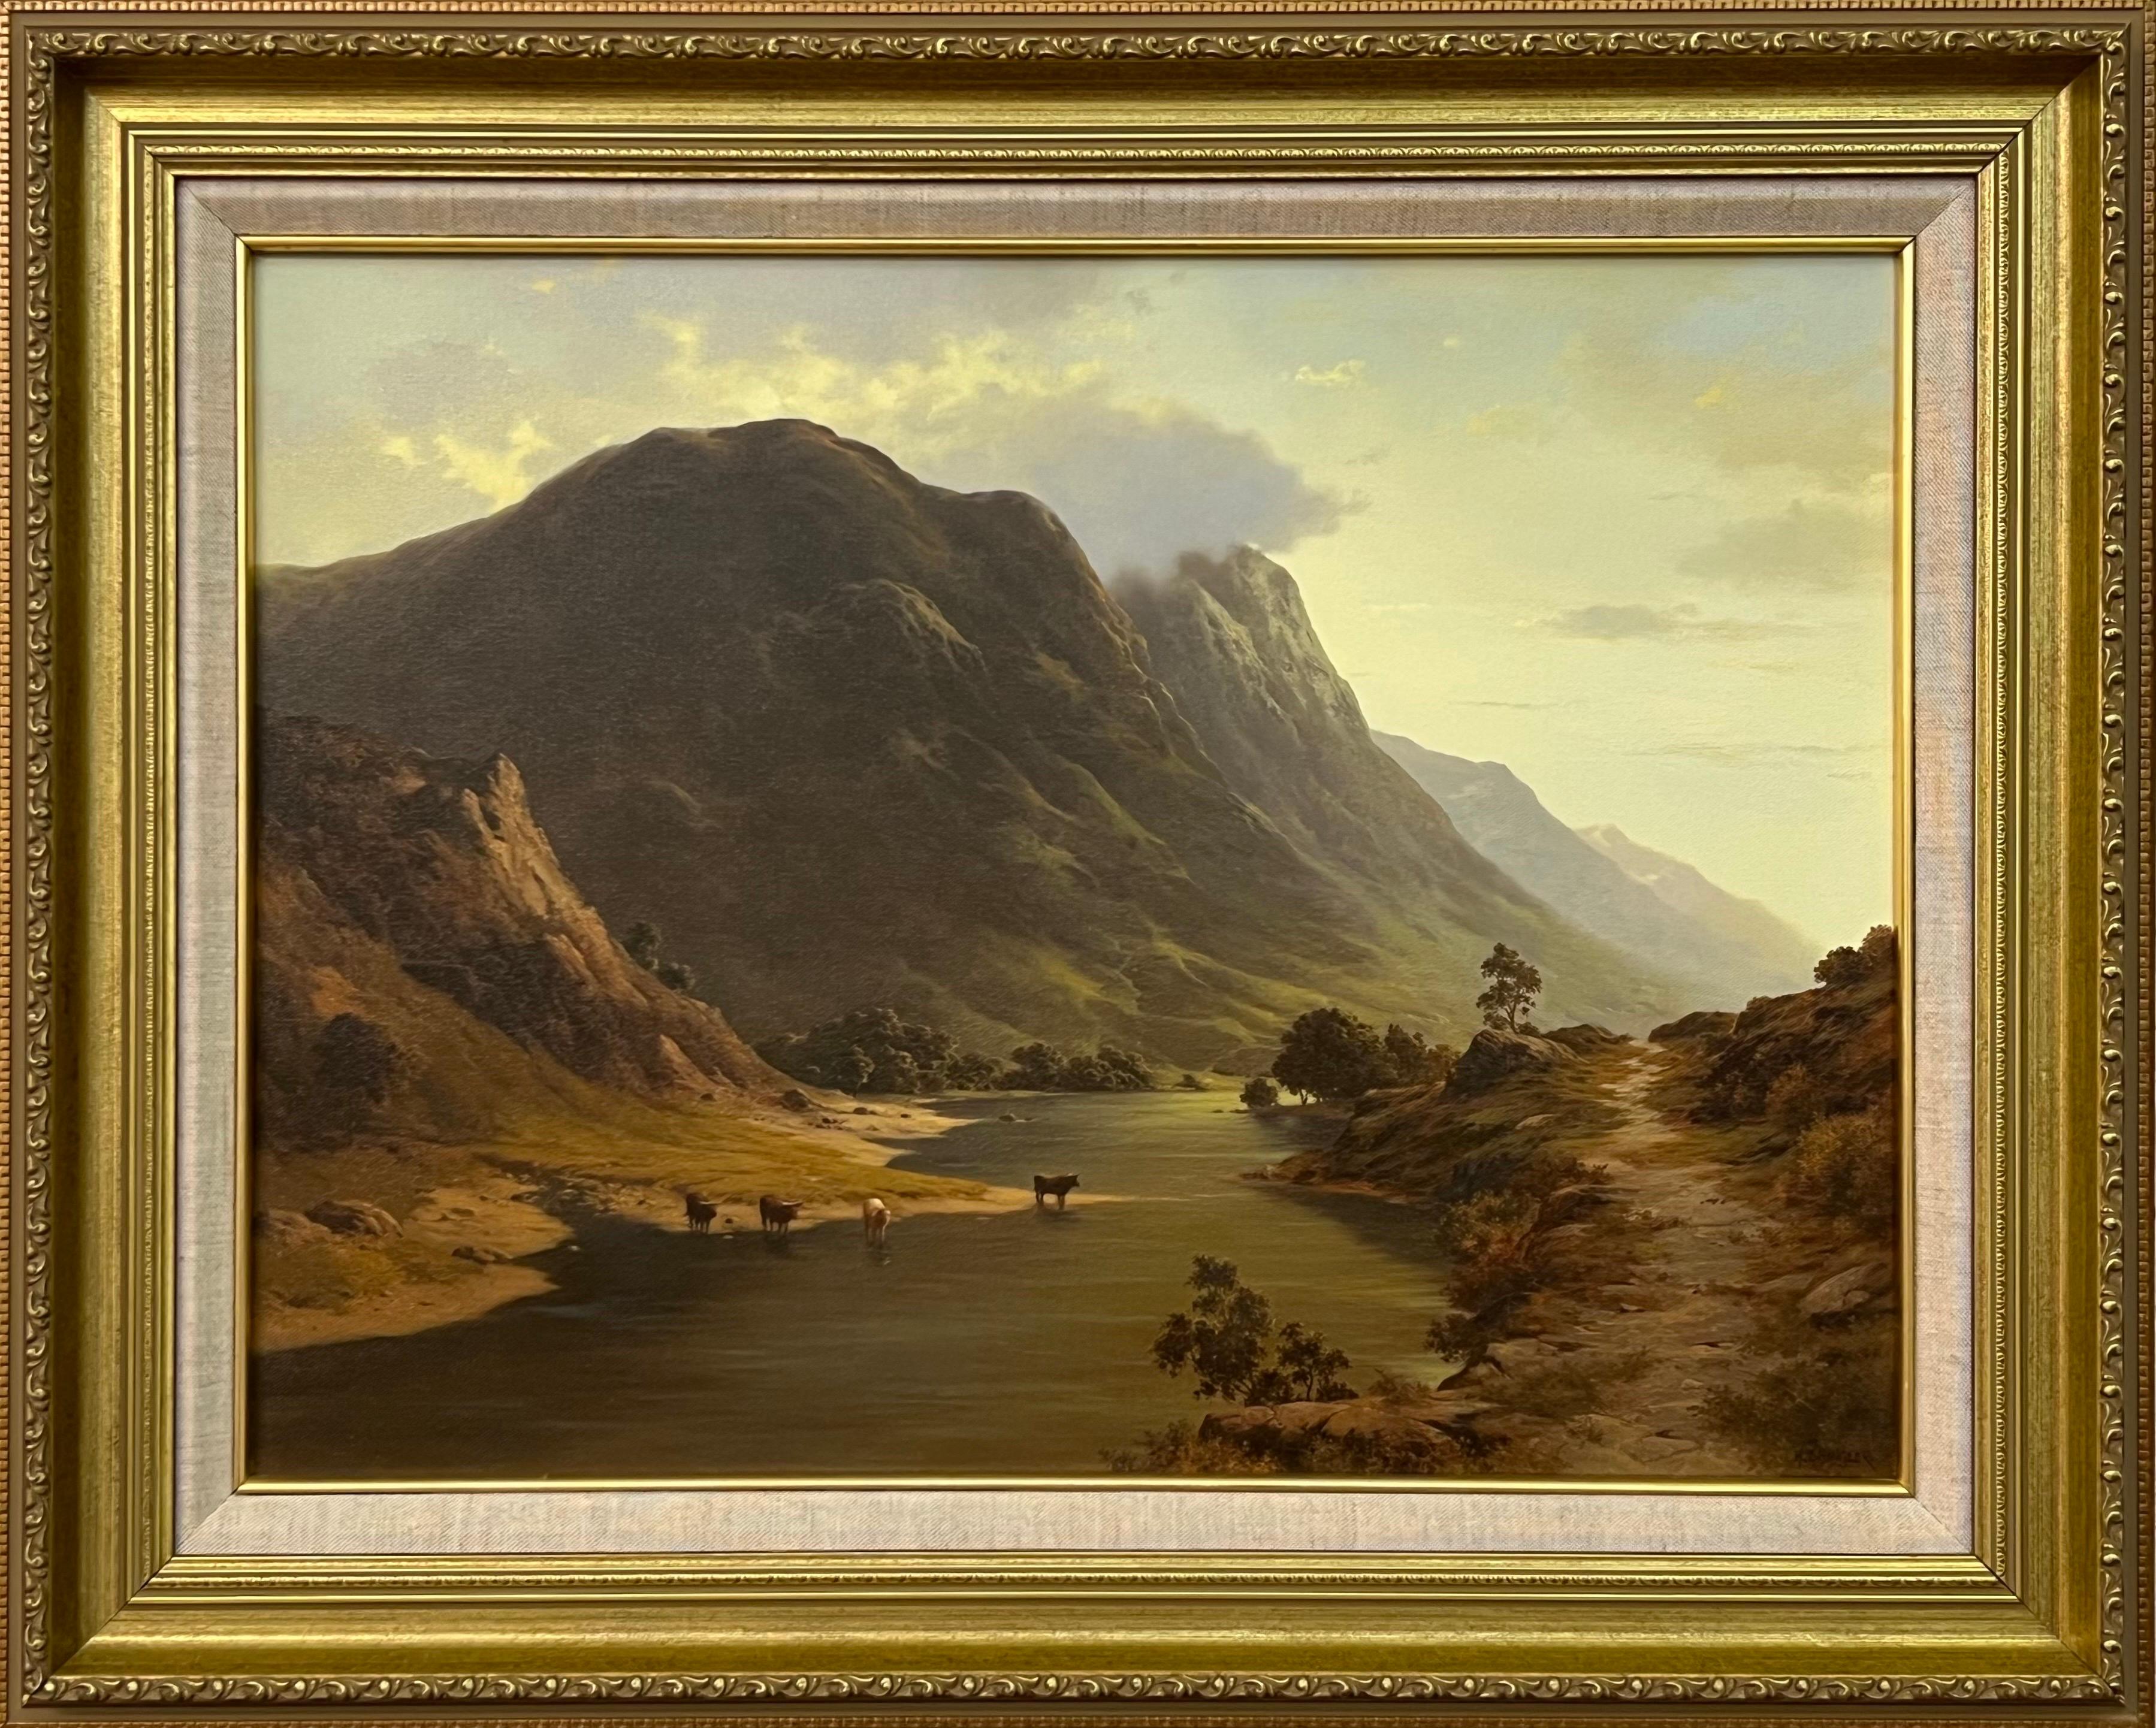 Howard Shingler Landscape Painting - Cattle drinking water from a Loch in the Mountains of the Scottish Highlands